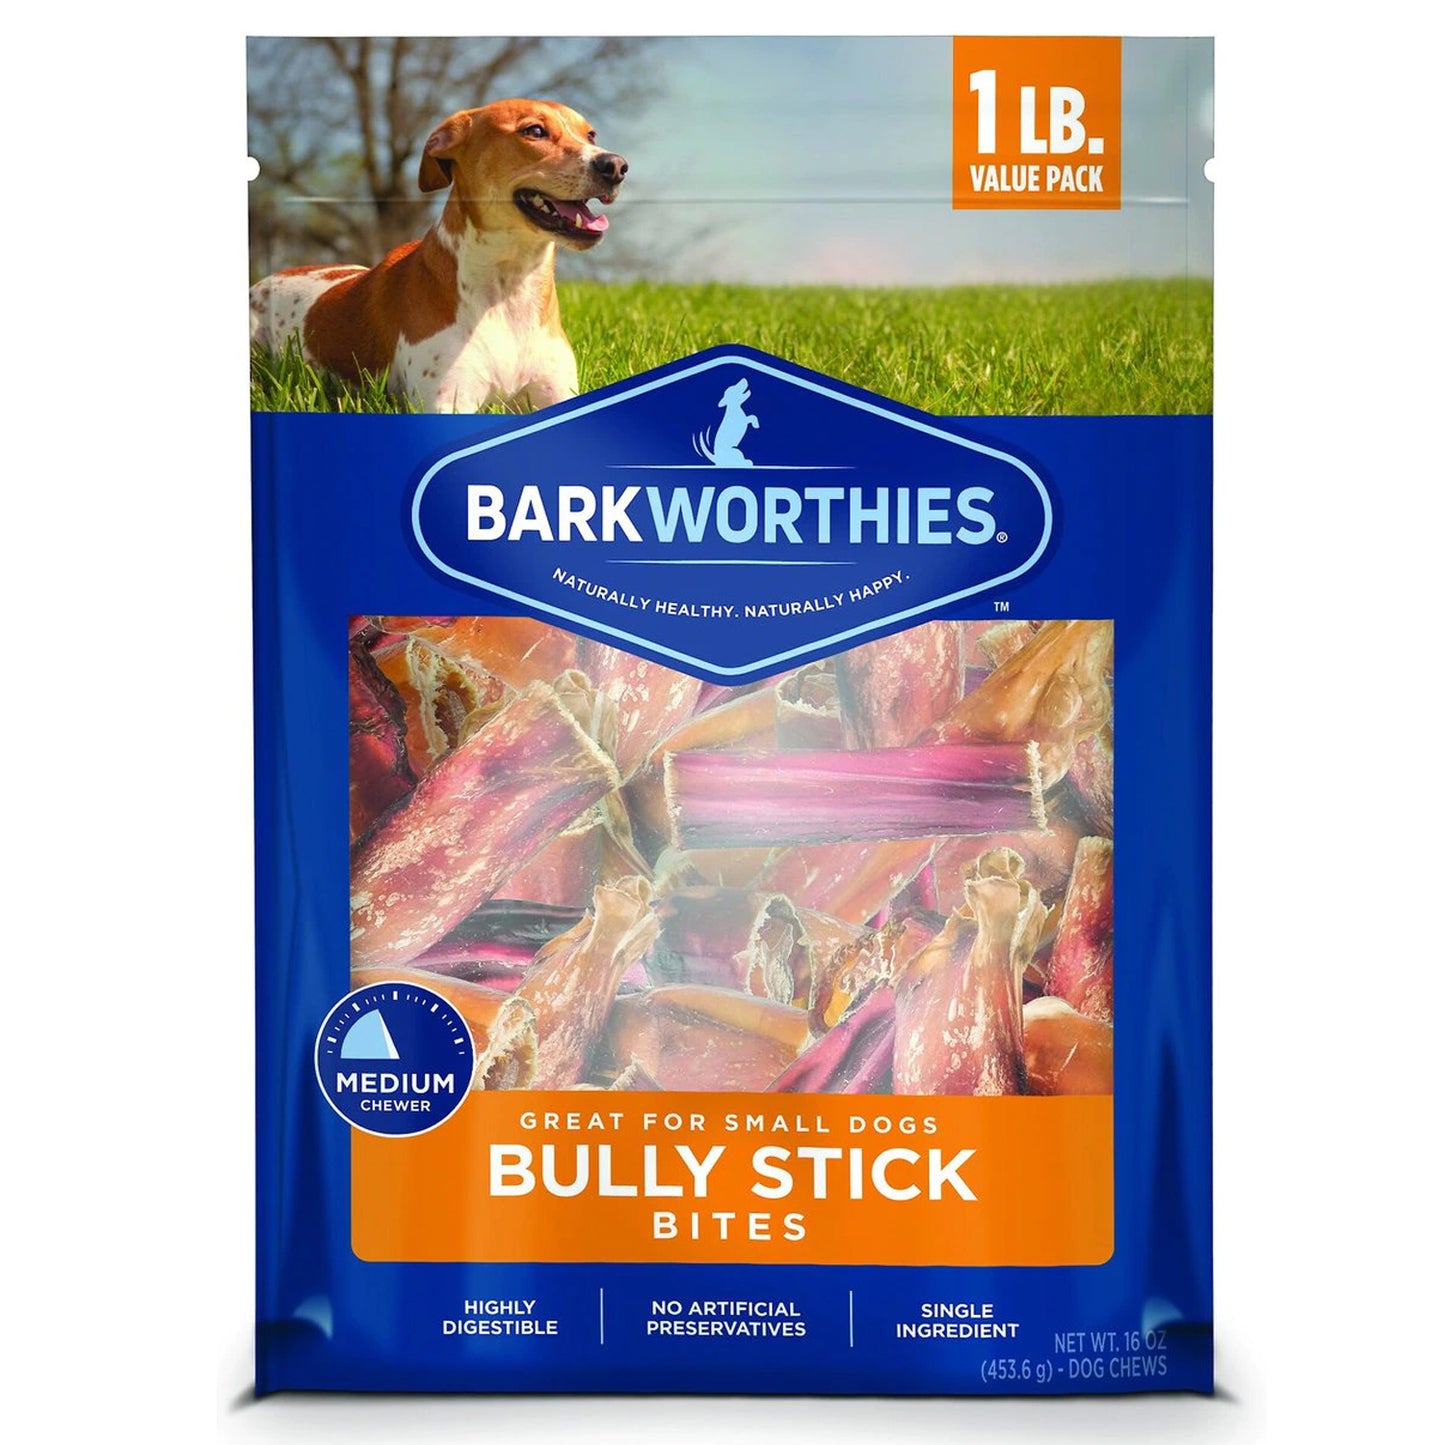 Barkworthies Bully Stick Bites for Small Dogs 1lb Bag